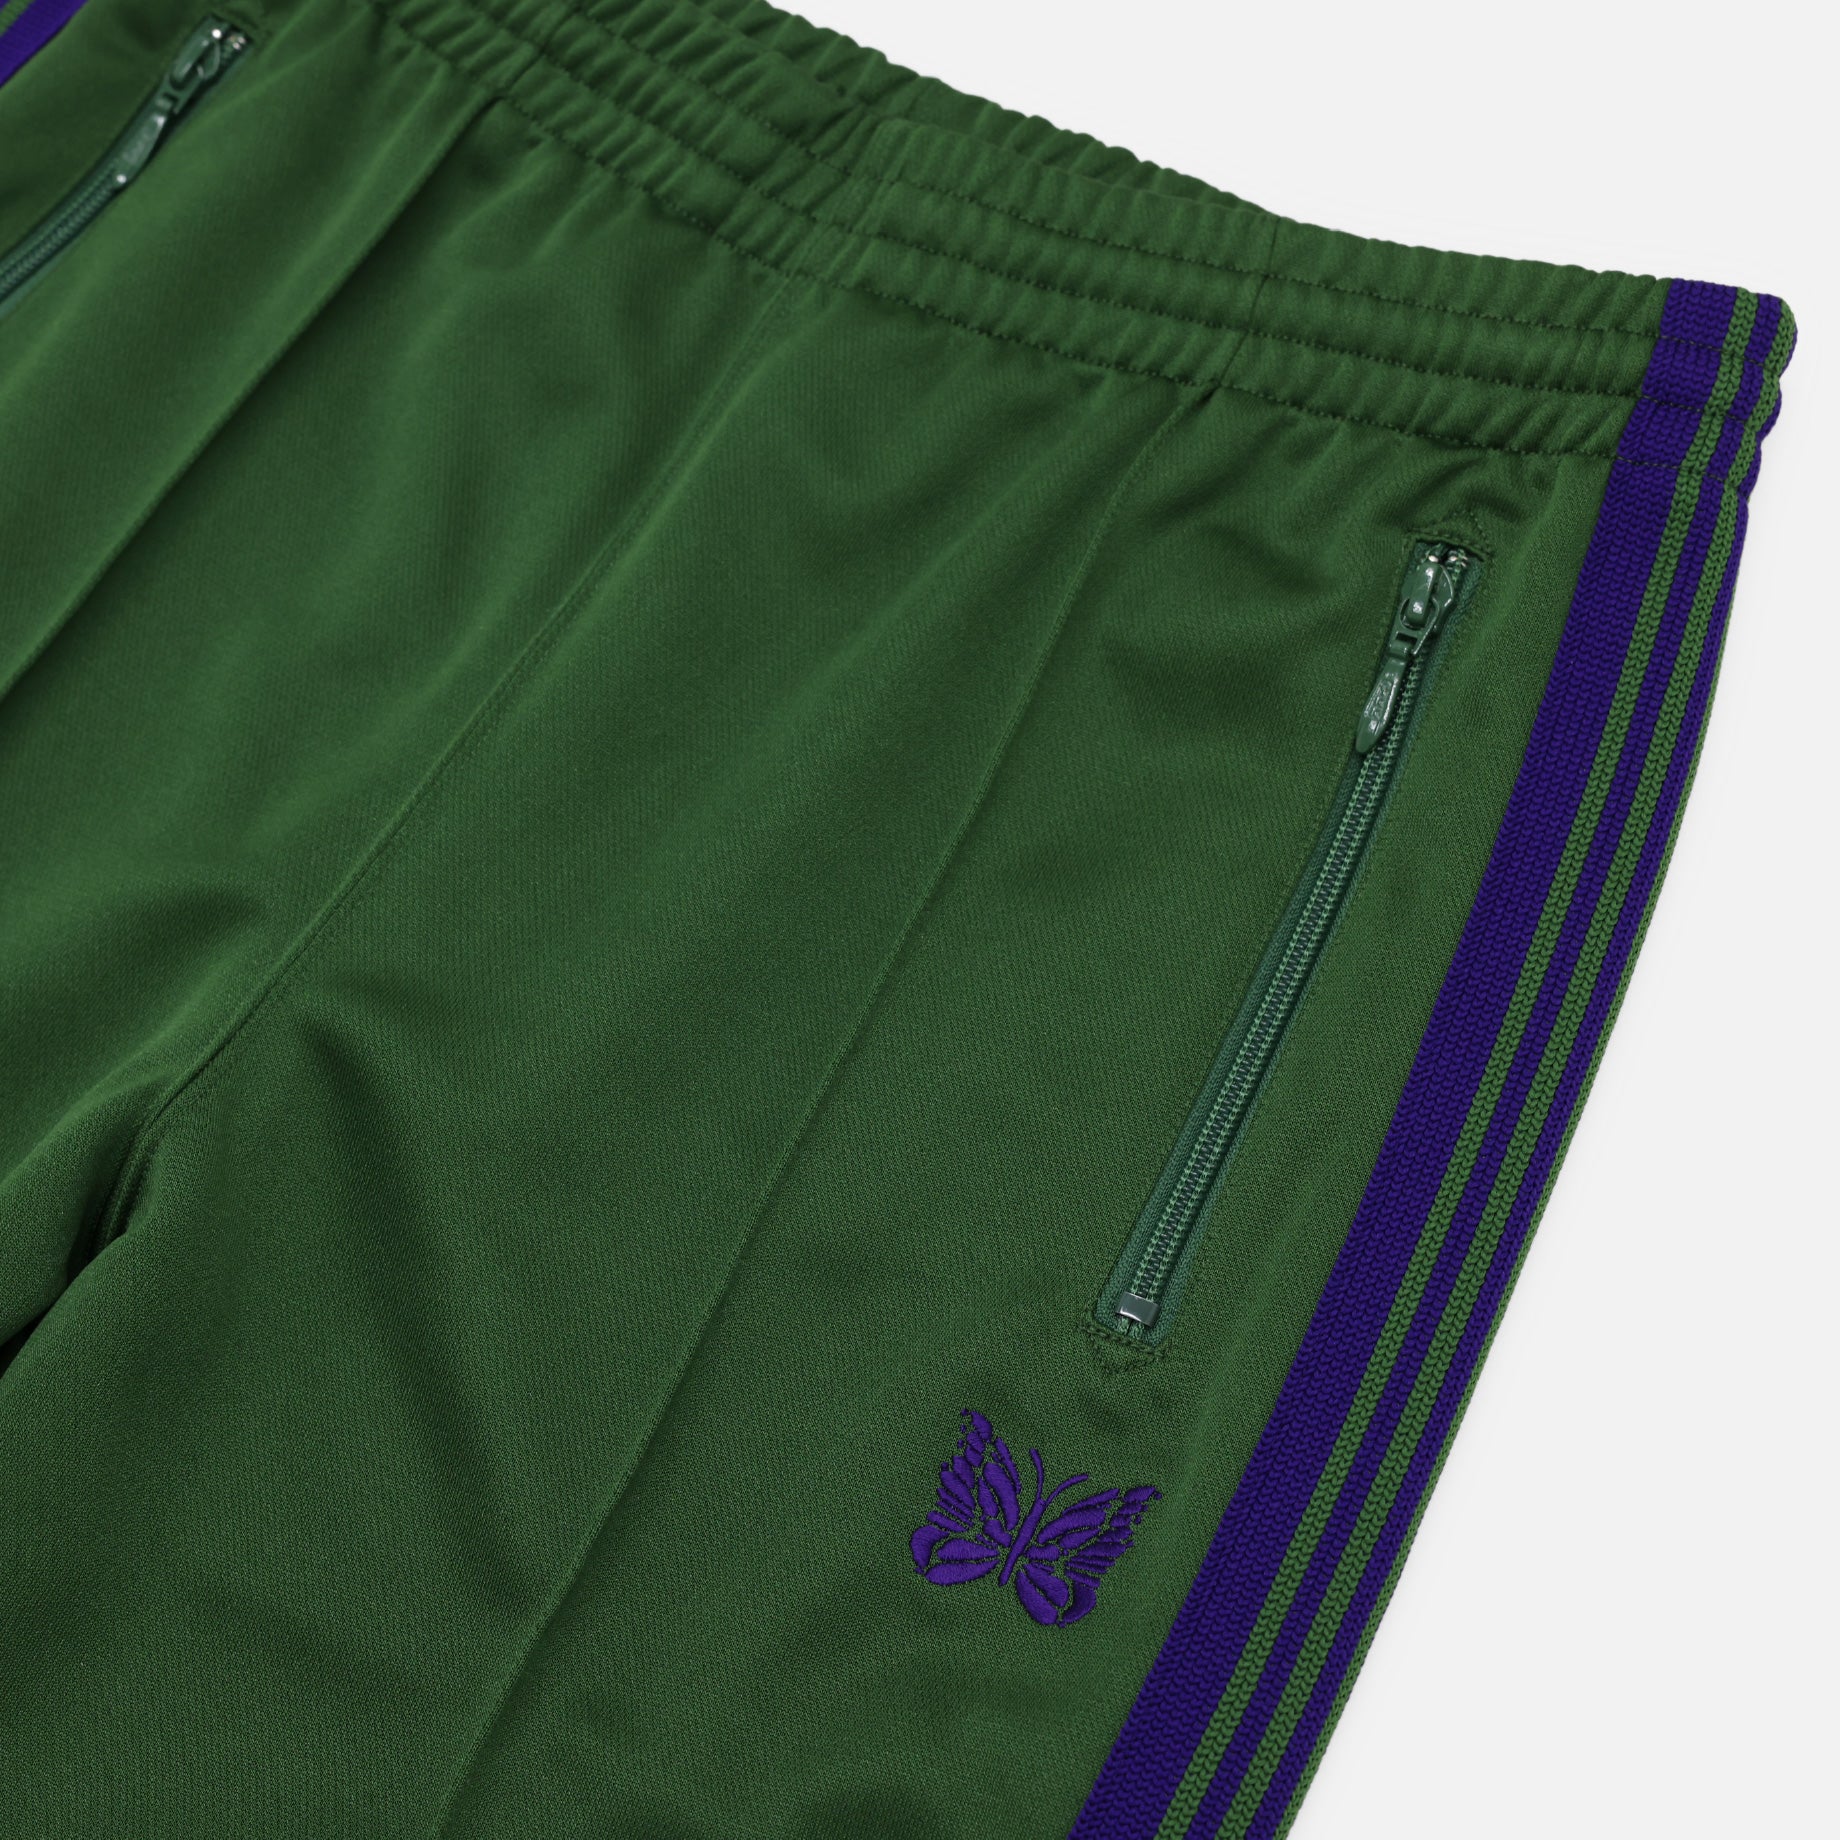 BOOT - CUT TRACK PANT - POLY SMOOTH（IVY GREEN）